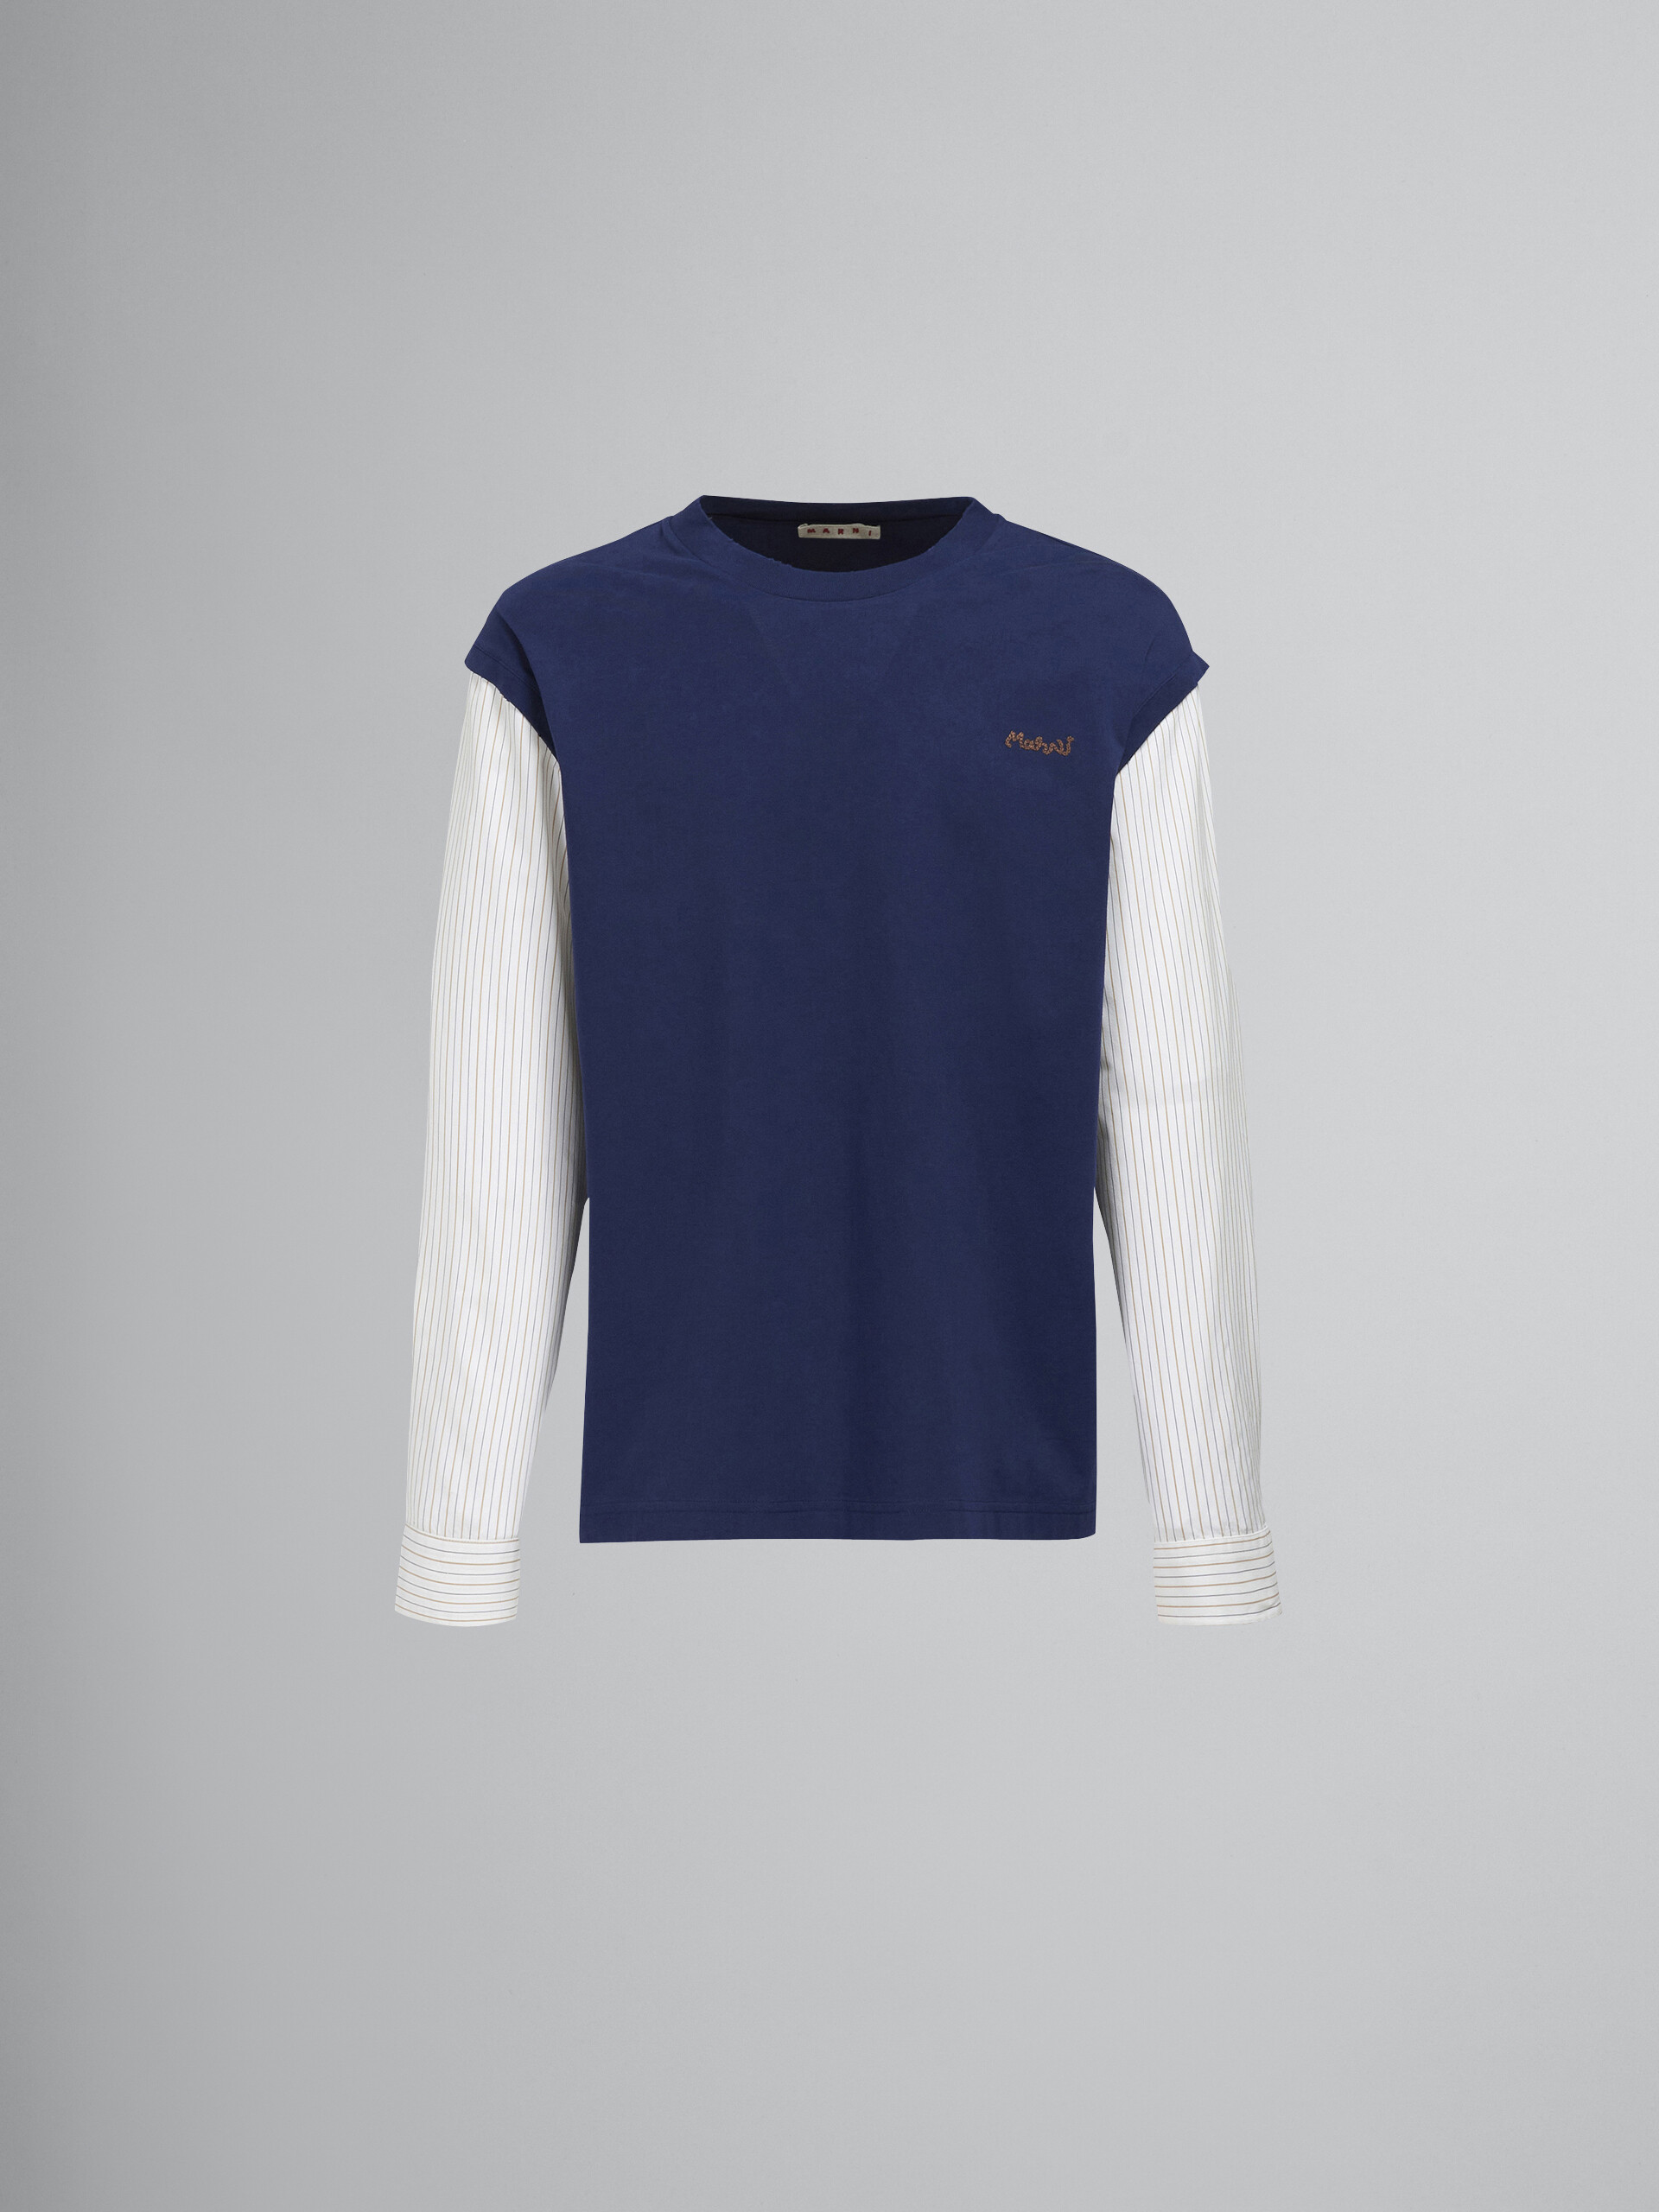 Blue jersey T-shirt with striped poplin sleeves - T-shirts - Image 1